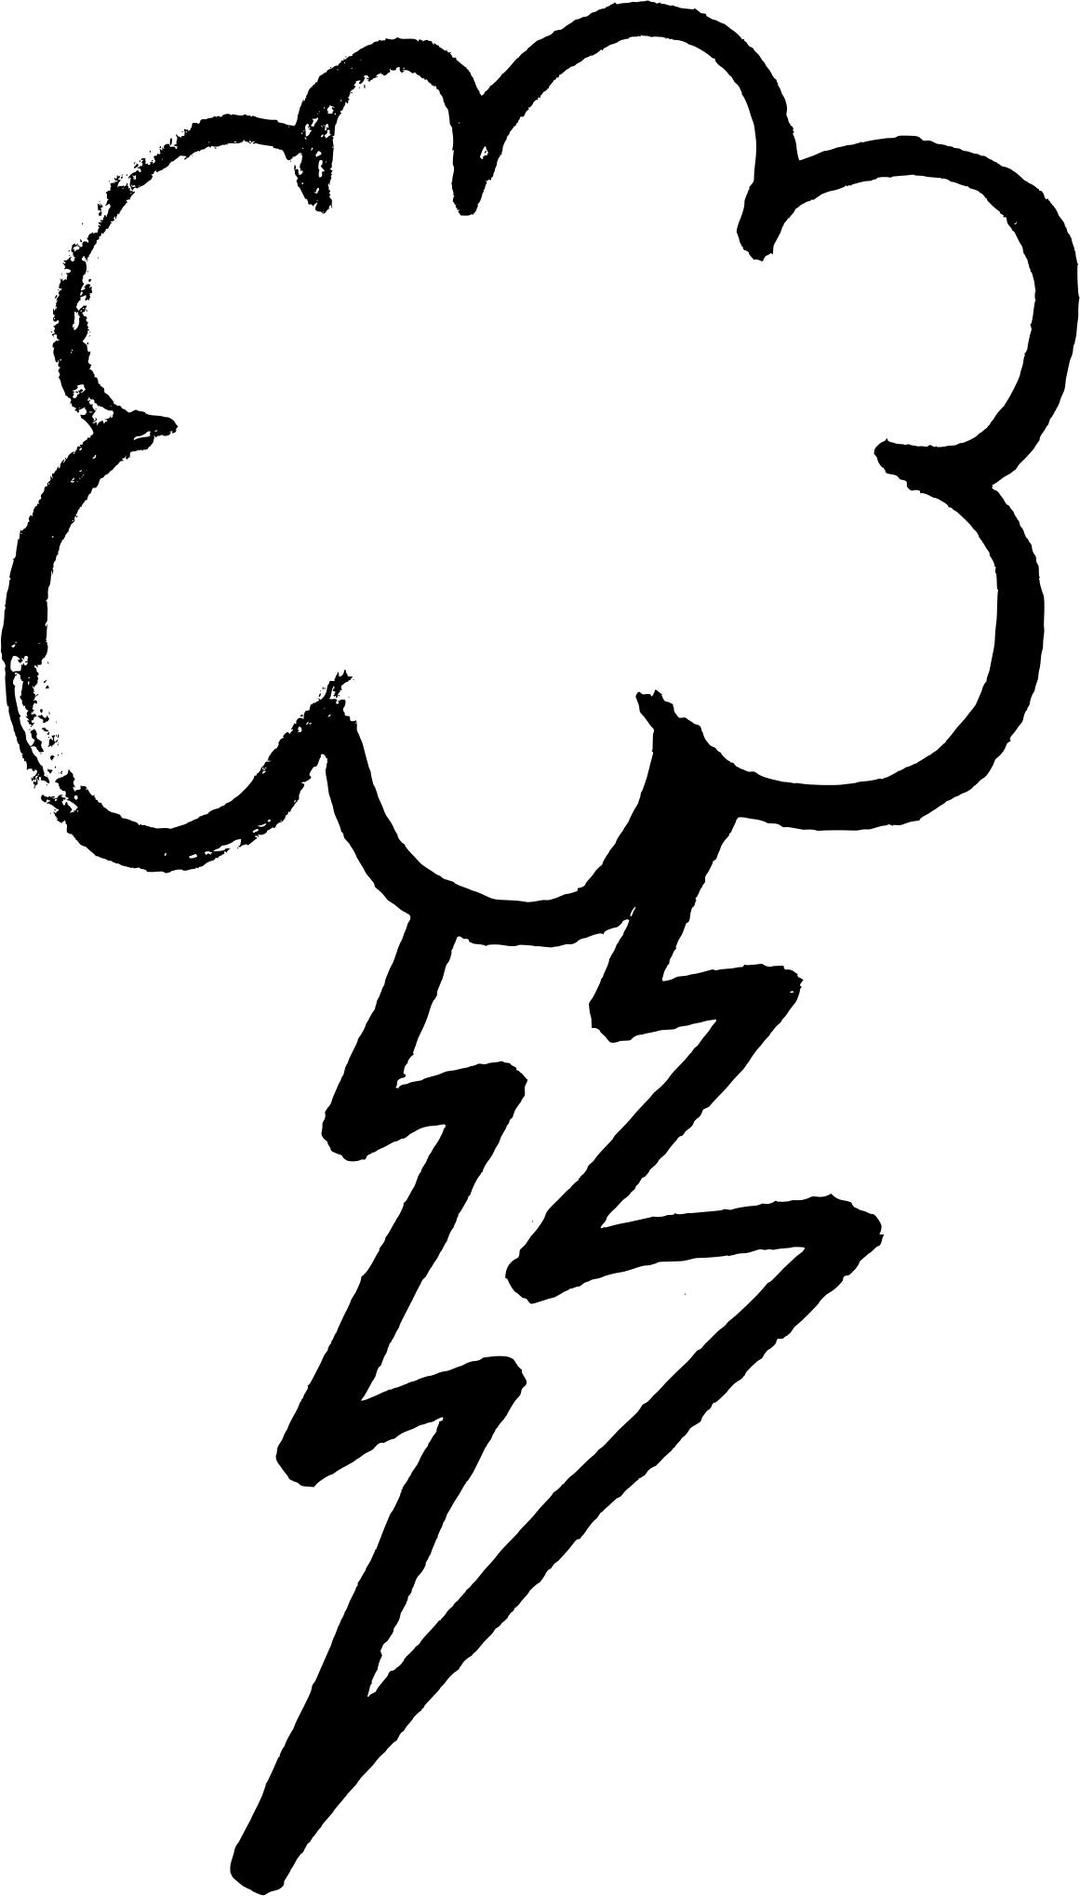 Daily Sketch: Thunder and Lightning png transparent